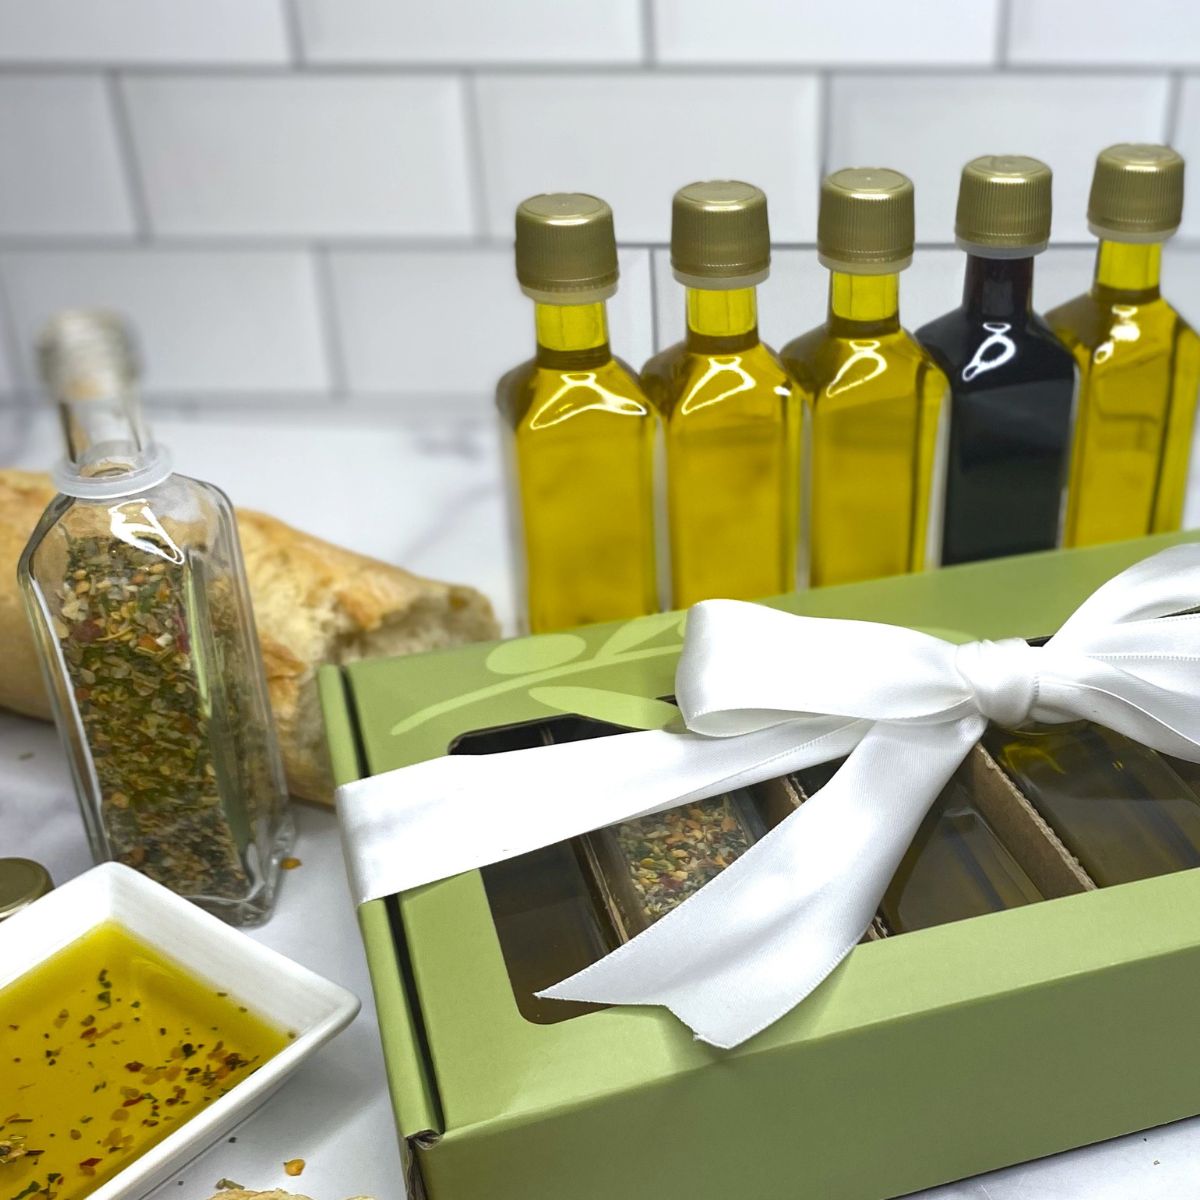 A starter collection of our 6 best selling vinegar, oils, and bread dipping herb mix. 